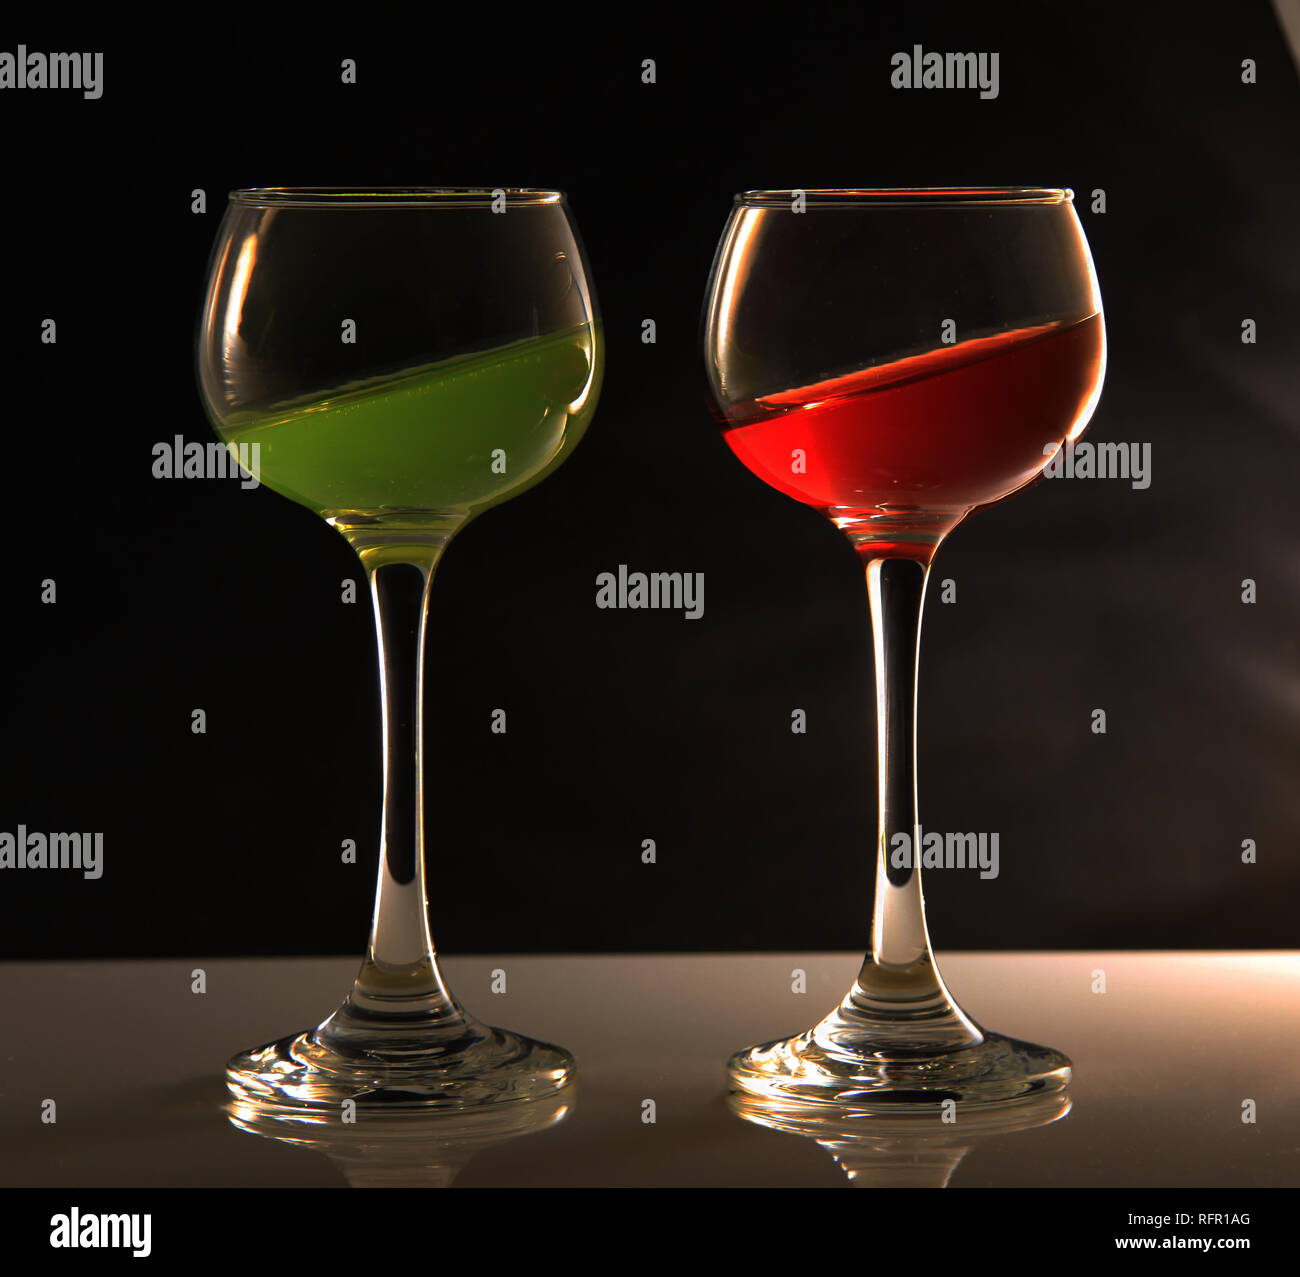 Wine glasses with different coloured liquids tilted at an angle Stock Photo